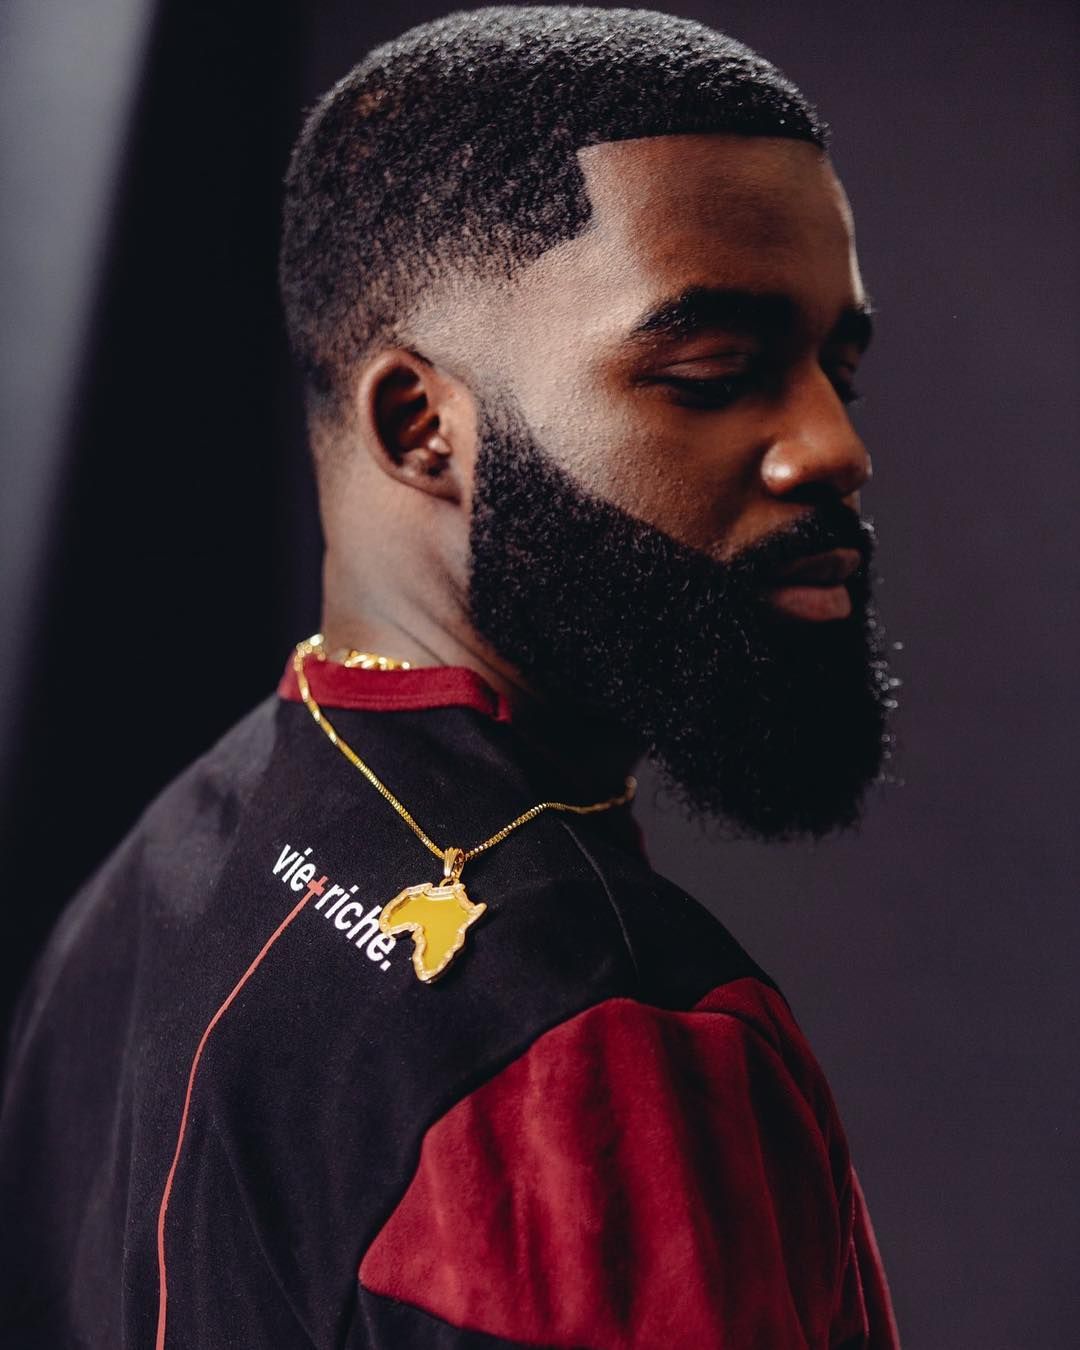 Afro B [@AfroB_] and Young T & Bugsey [@YoungTandBugsey] are making commercial waves abroad